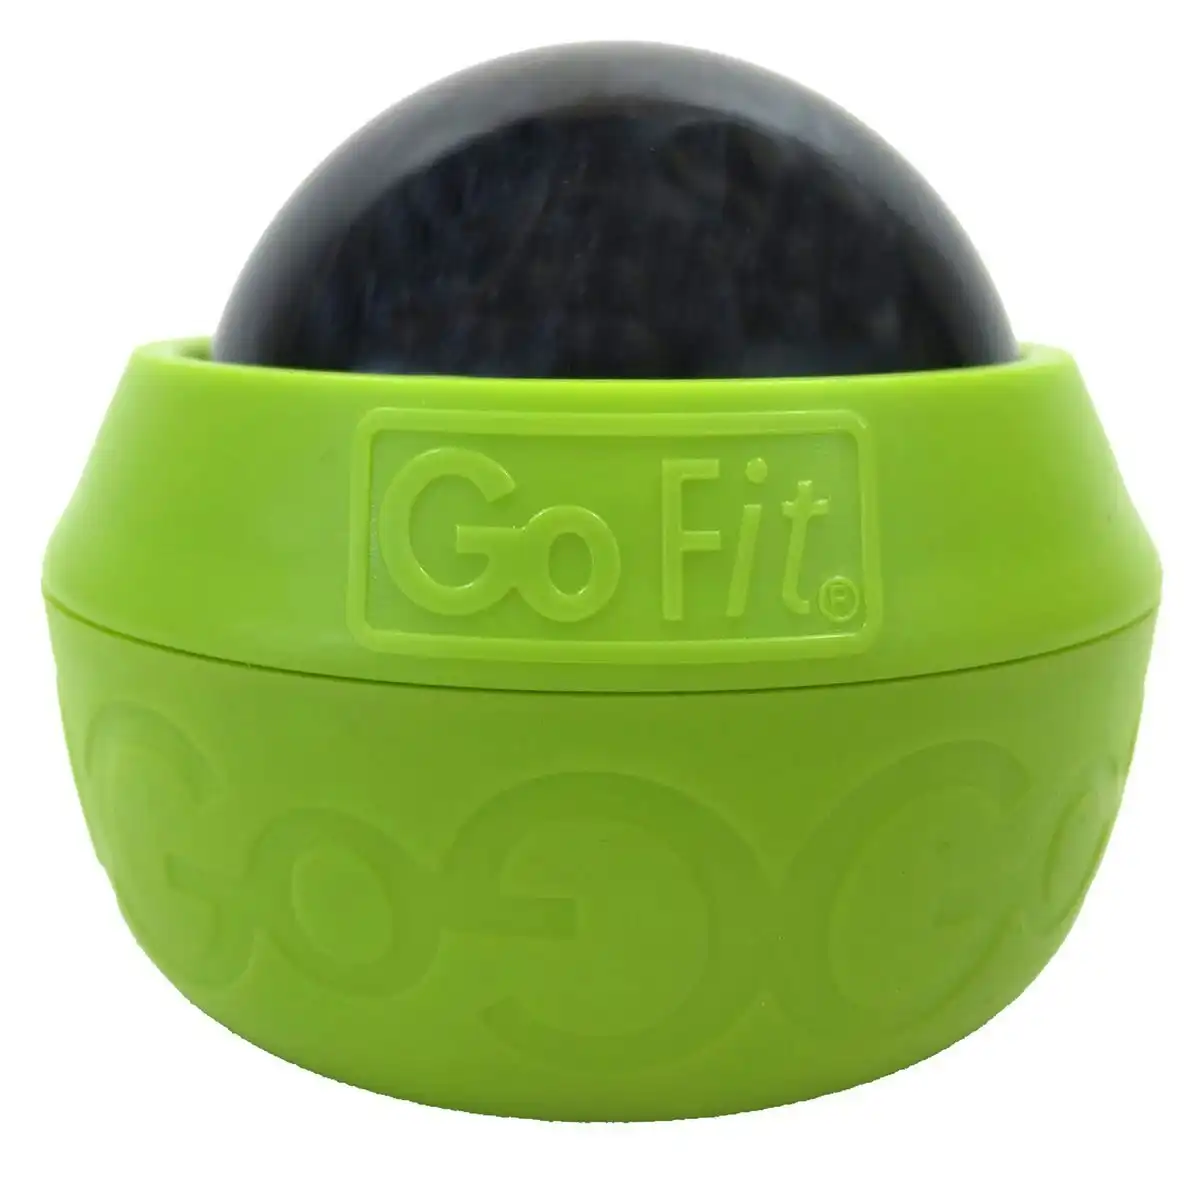 Gofit 8cm Roll-On Portable Rolling Massager for Shoulder/Body/Muscle Recovery